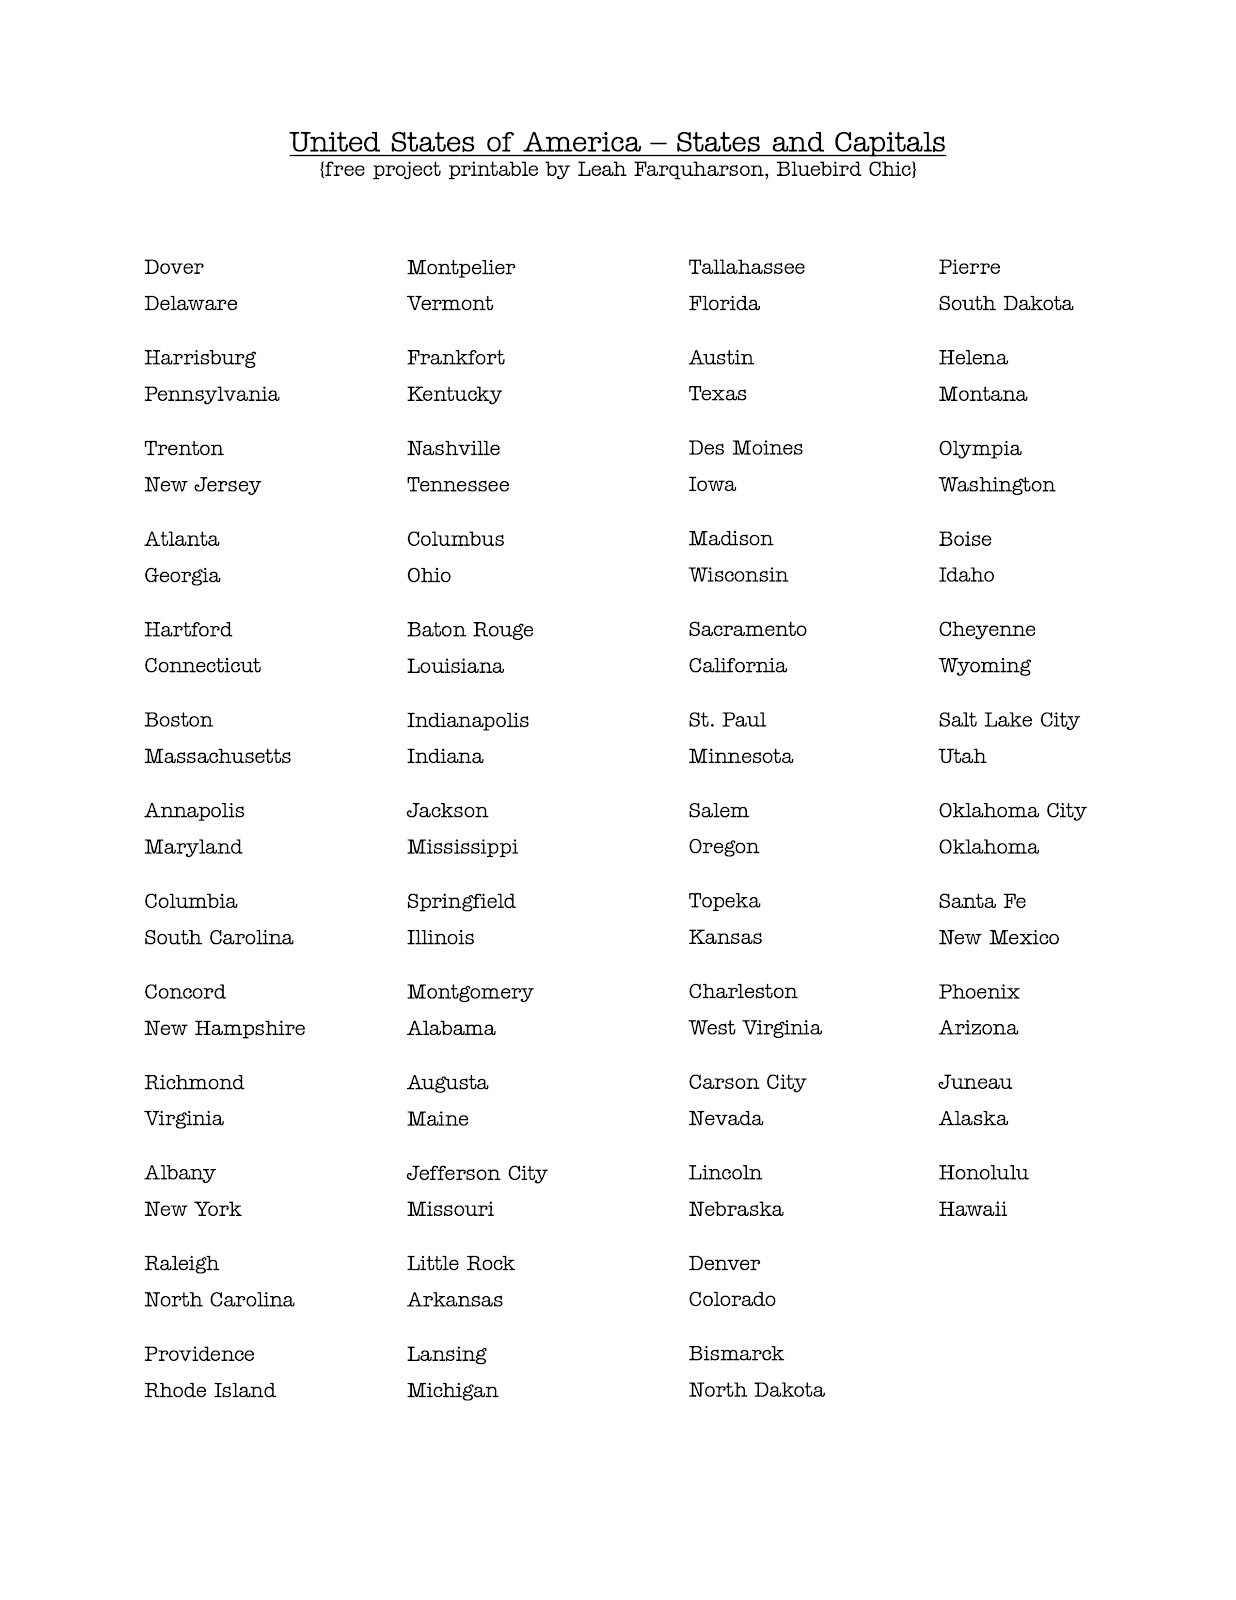 States and Capitals Matching Worksheet List 50 States Abbreviations Worksheet